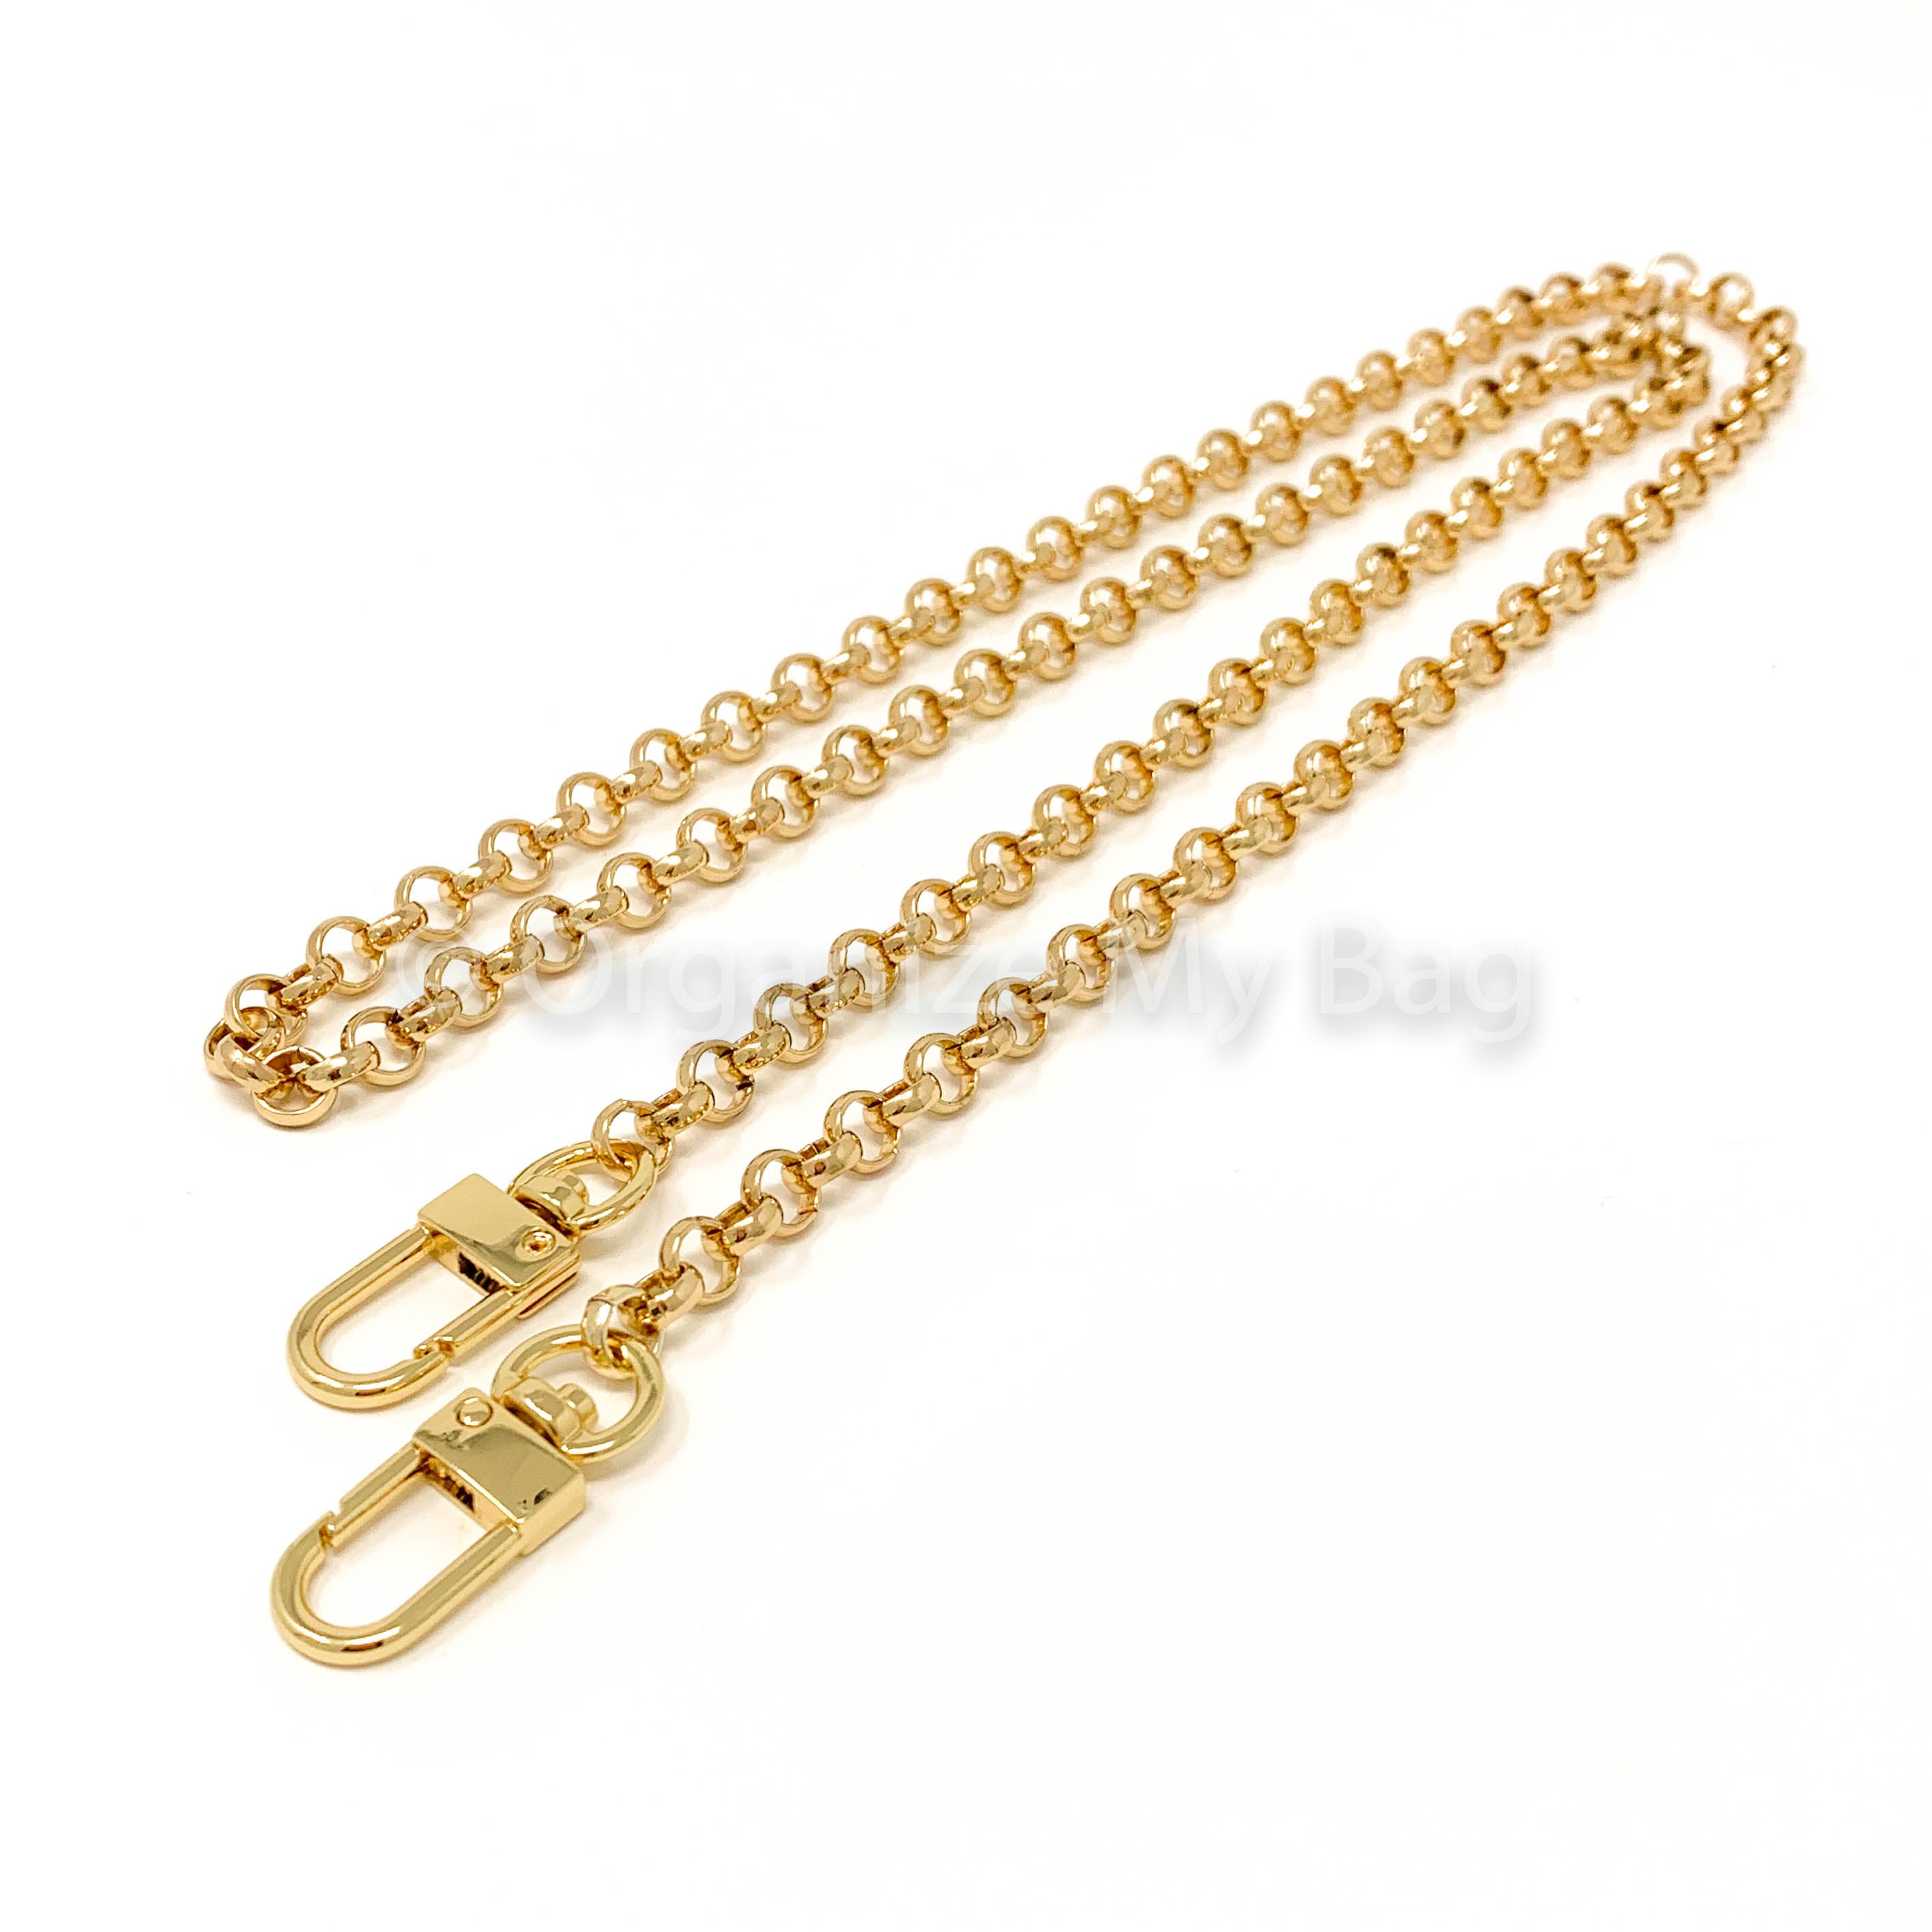 Chain Strap Extender in Light Gold Rolo Chain Style for Designer Bags